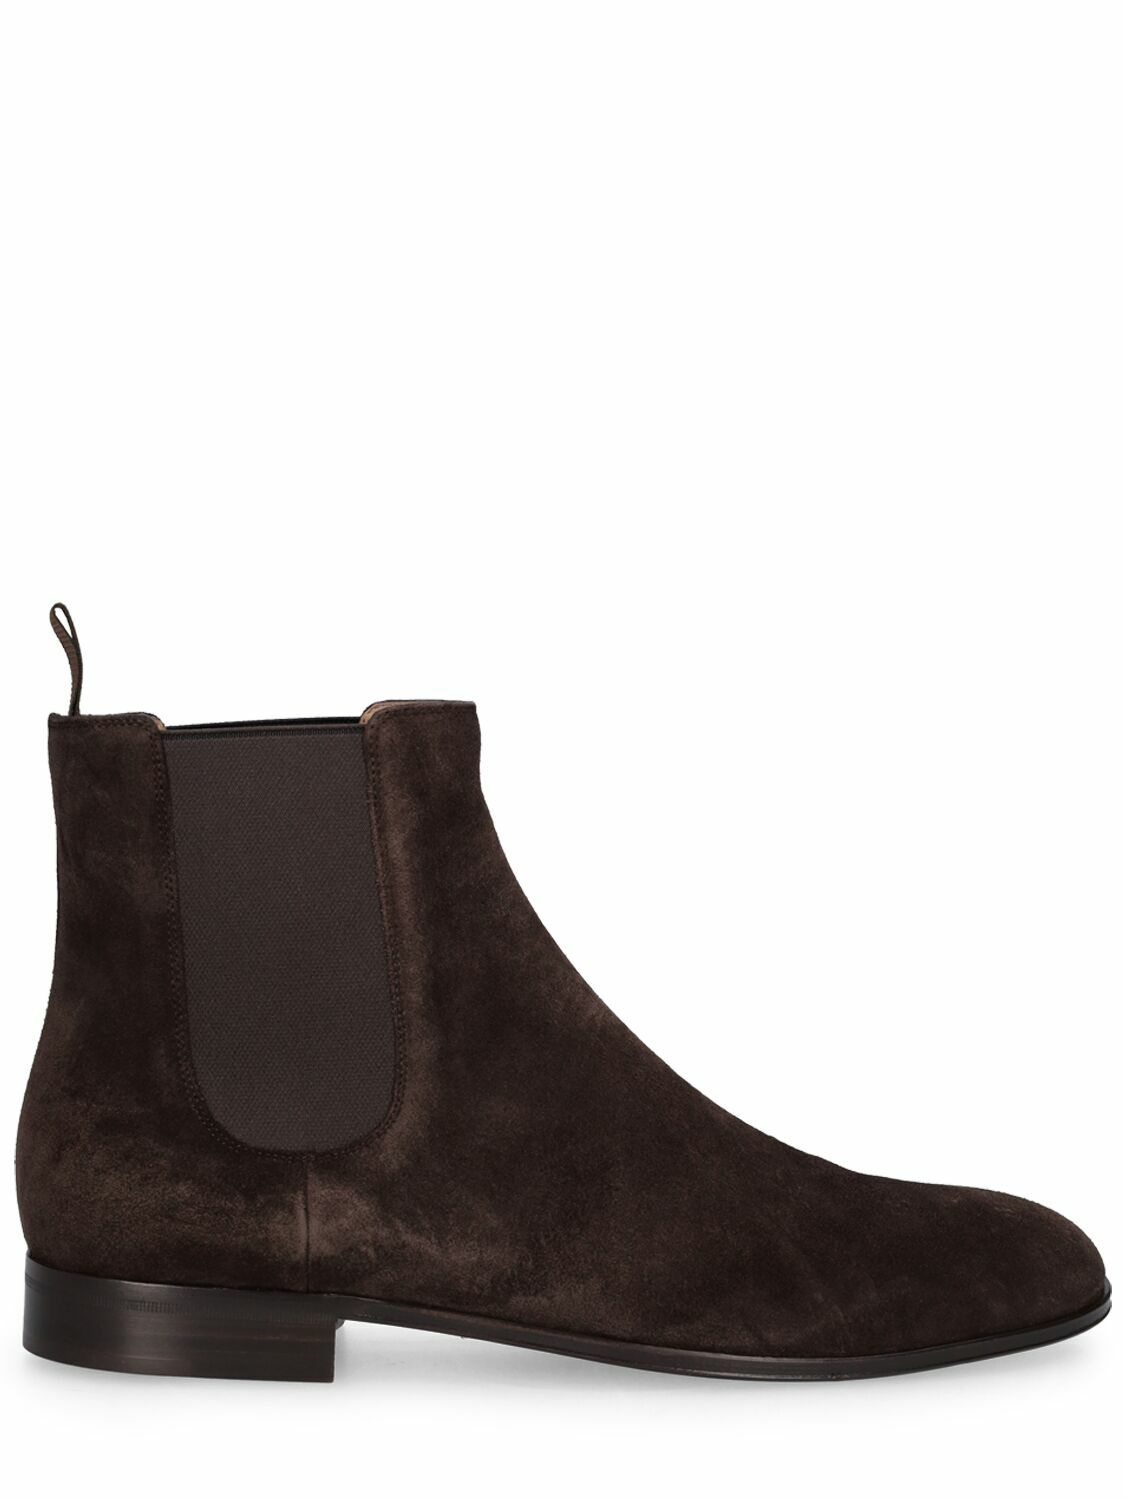 Photo: GIANVITO ROSSI - Alain Suede Chelsea Boots